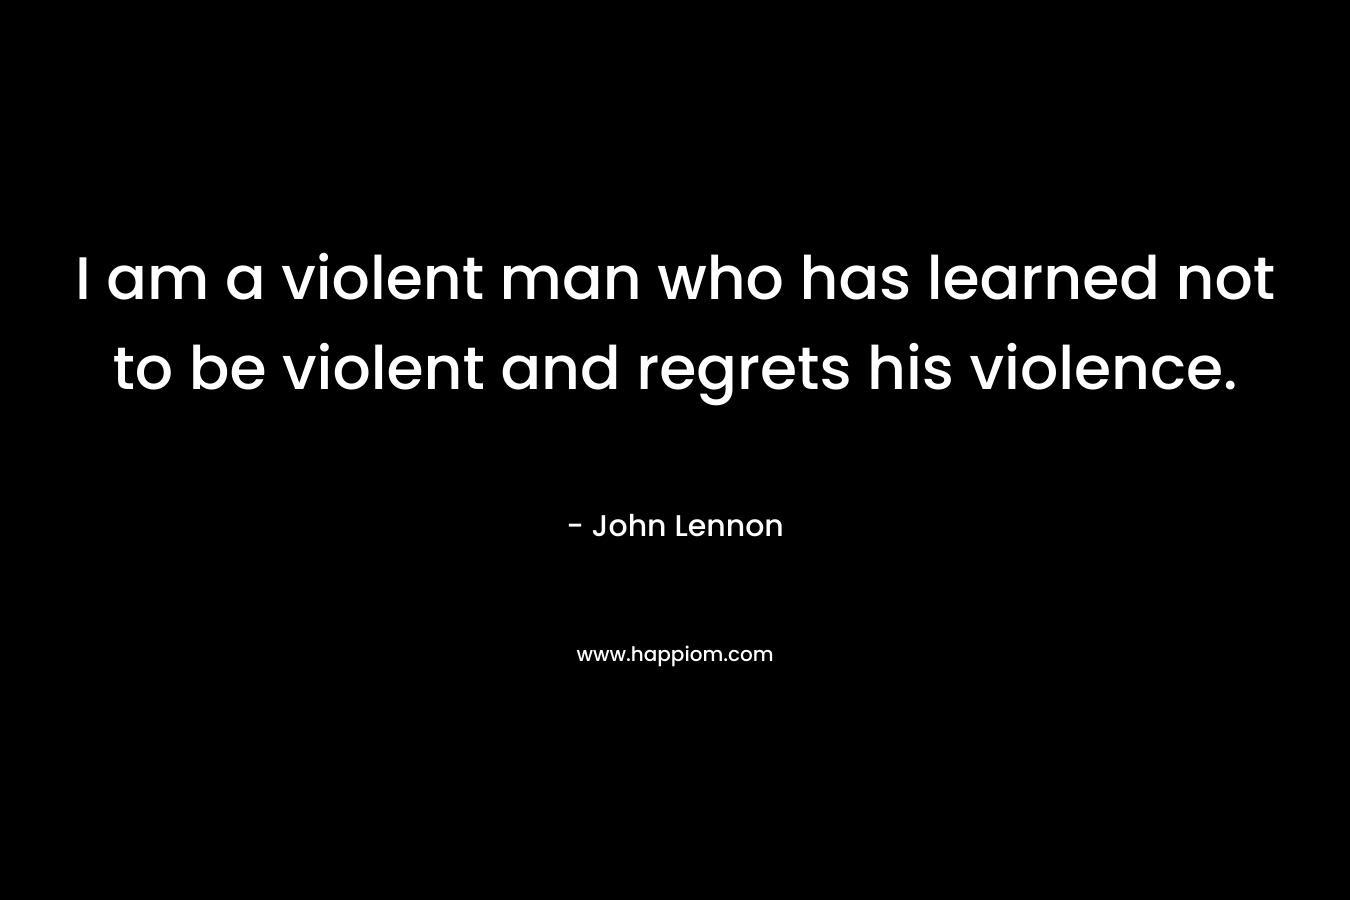 I am a violent man who has learned not to be violent and regrets his violence. – John Lennon